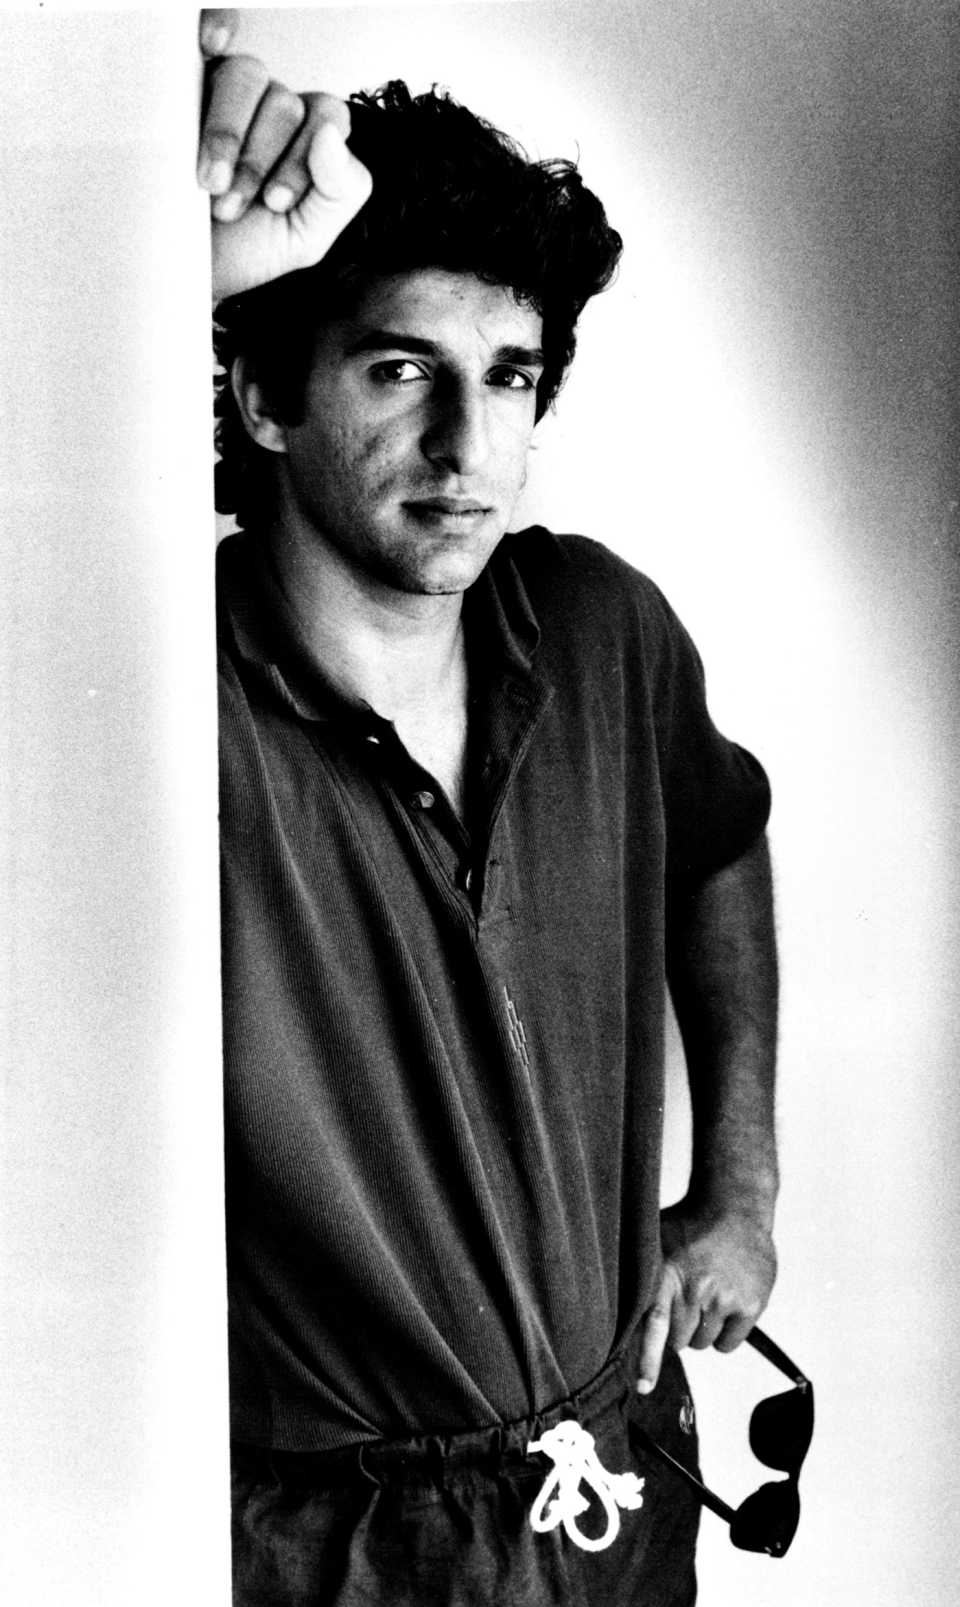 Wasim Akram poses for a photo, March 9, 1990